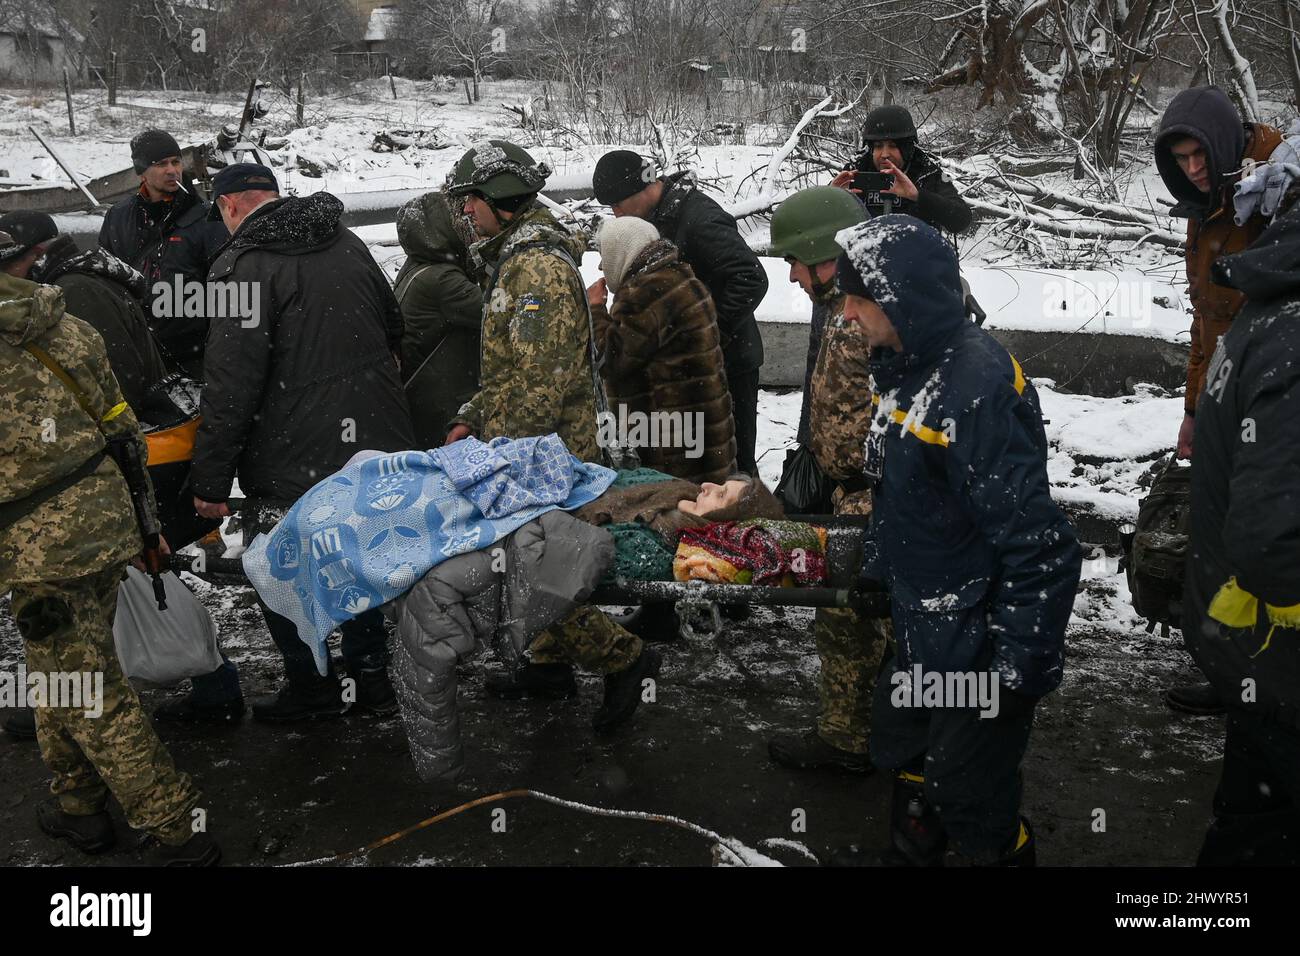 Evacuation efforts of Irpin continue through adverse weather conditions.  Ukrainian first responders and volunteers ferried refugees to Kyiv in buses  and vans. Irpin, Ukraine, March 8, 2022. Civilians have been evacuating the